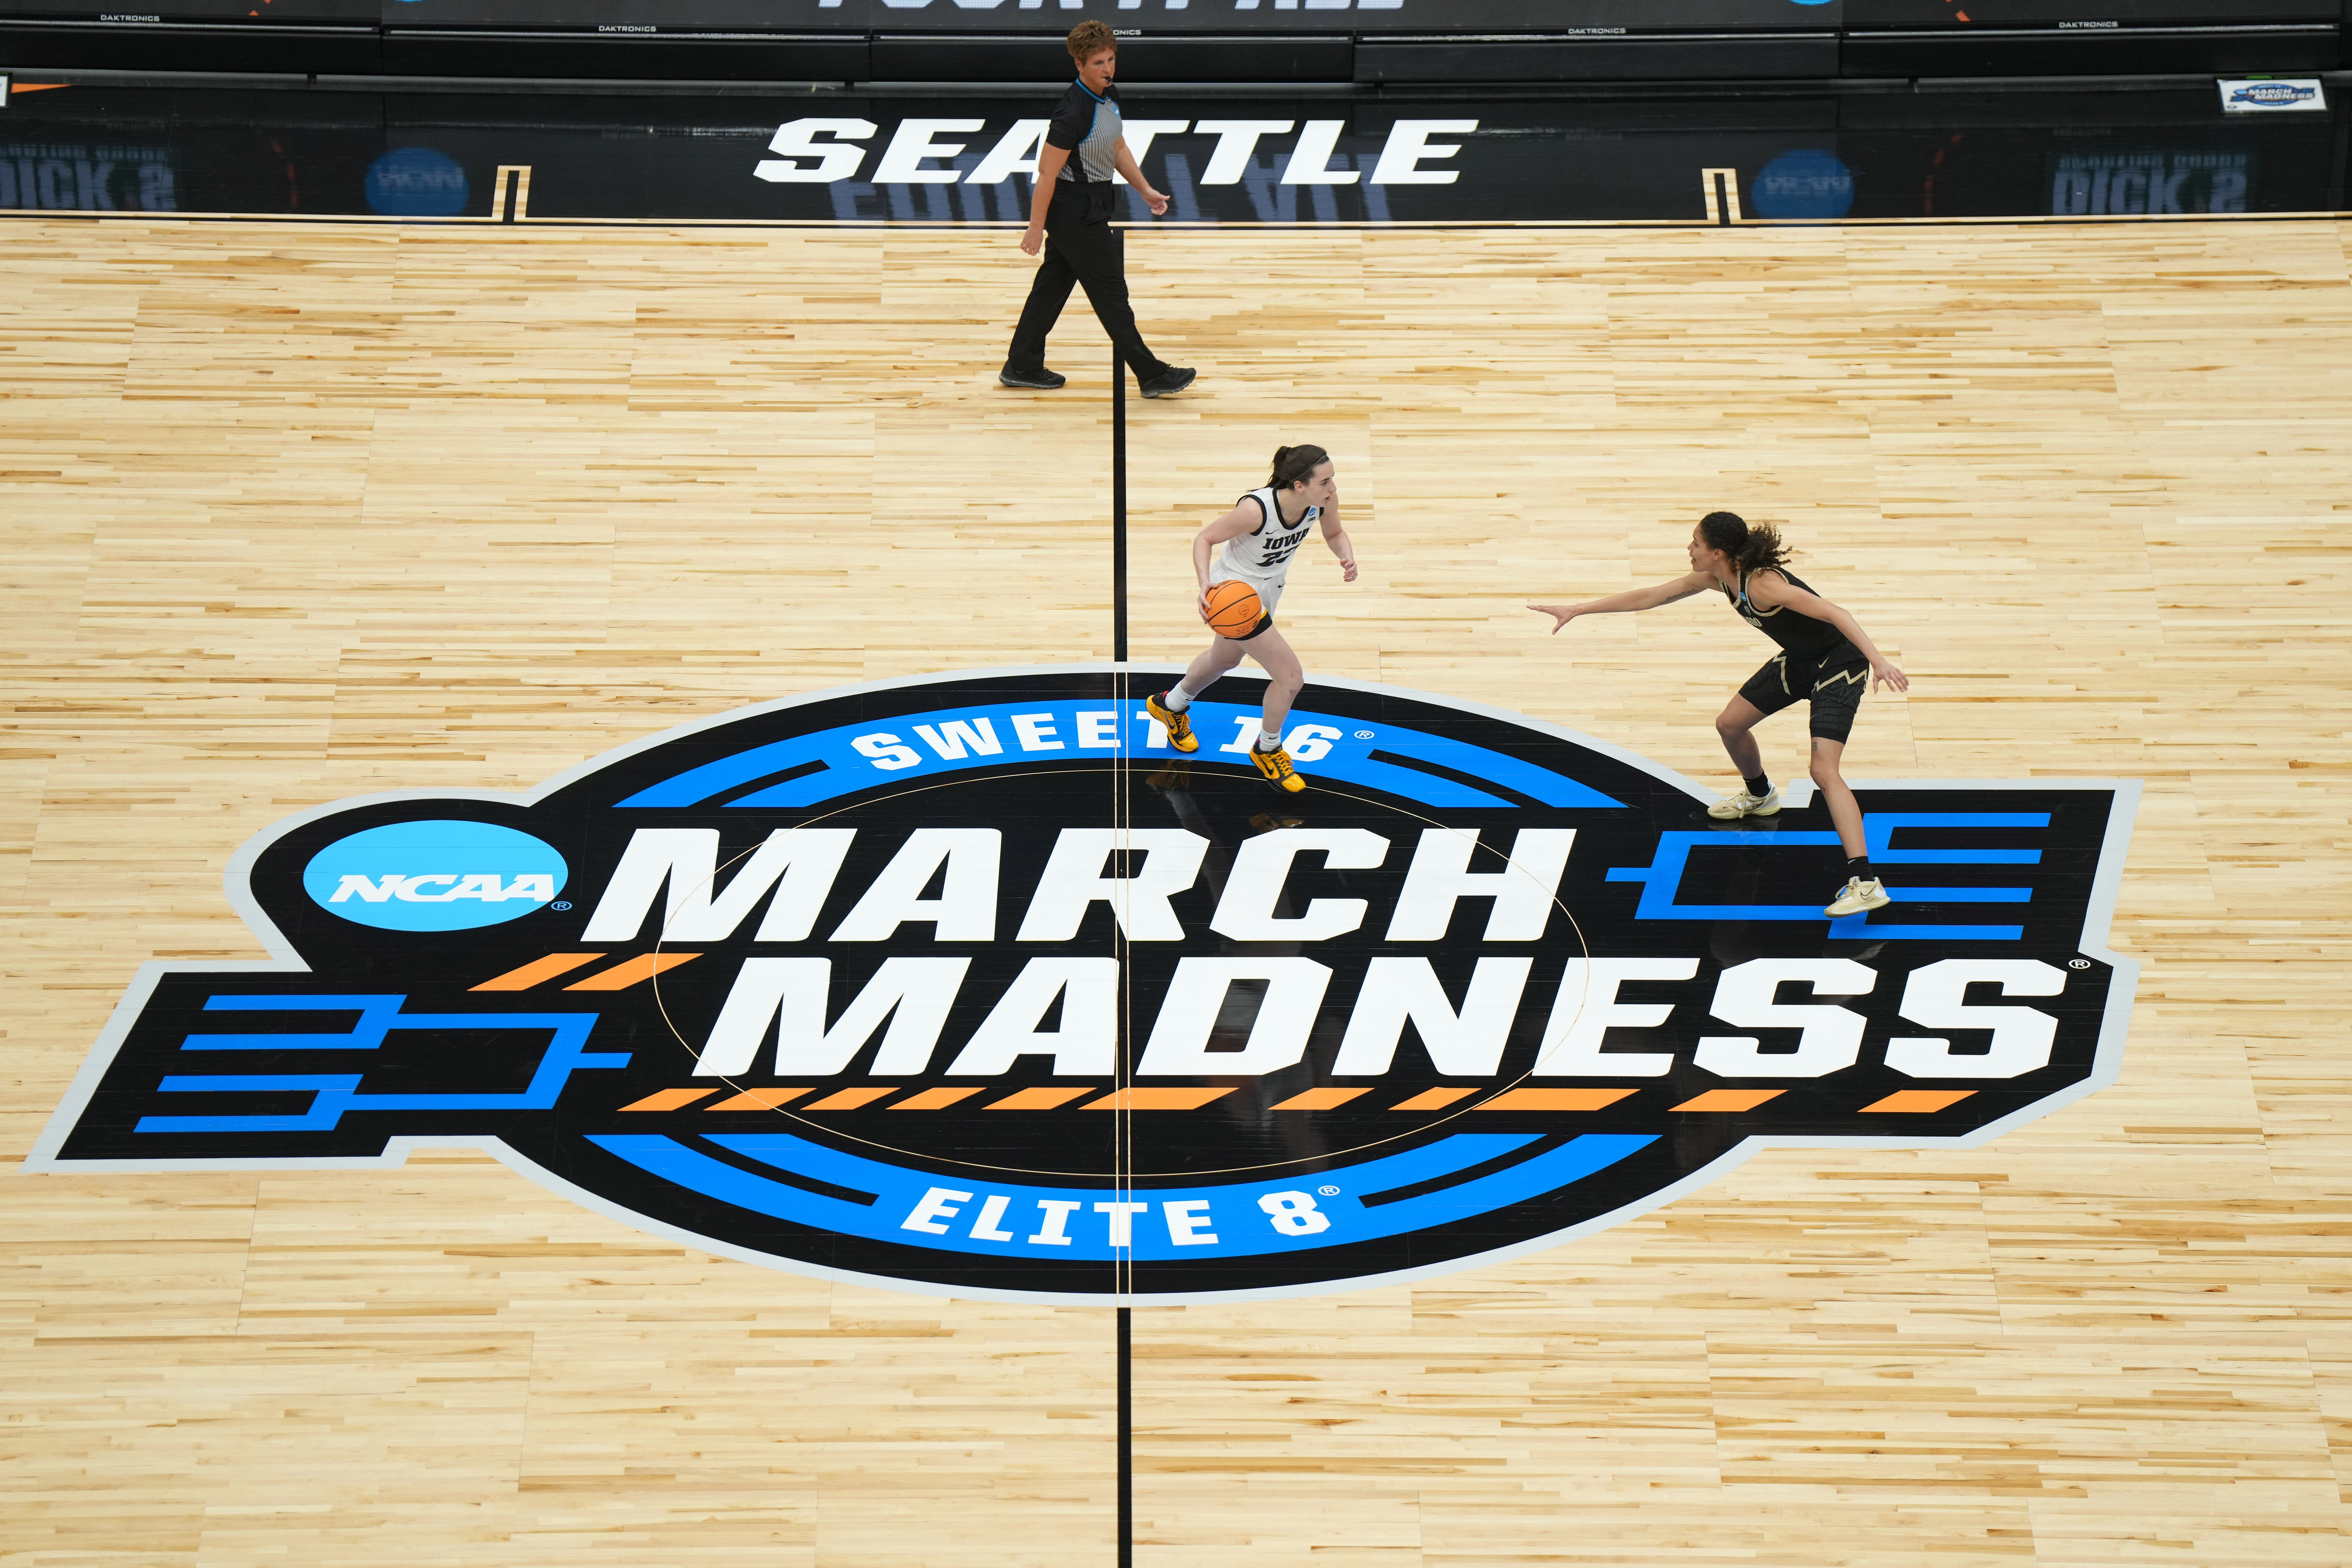 Well over 1 million watched Colorado-Iowa in the Sweet 16 as part of record-breaking NCAA women’s basketball tournament